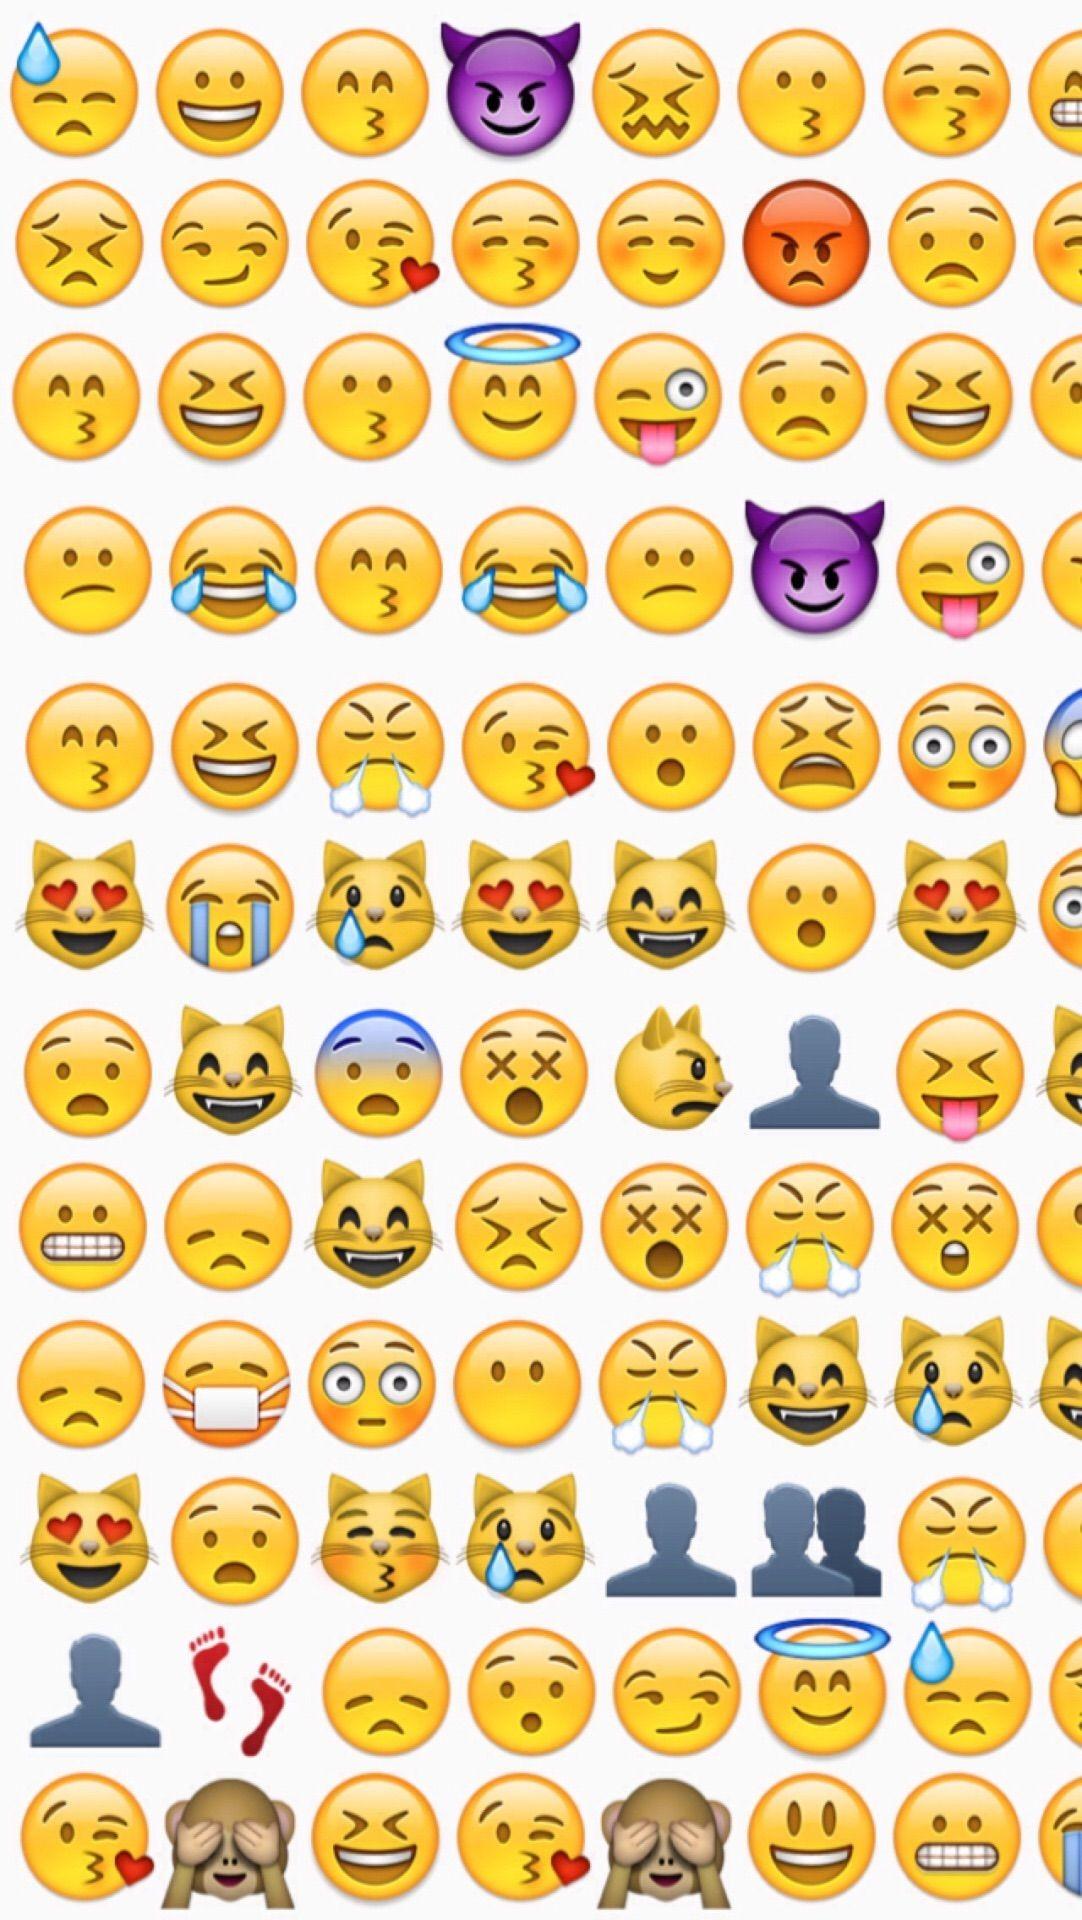 The emoticon keyboard is shown in this image - Emoji